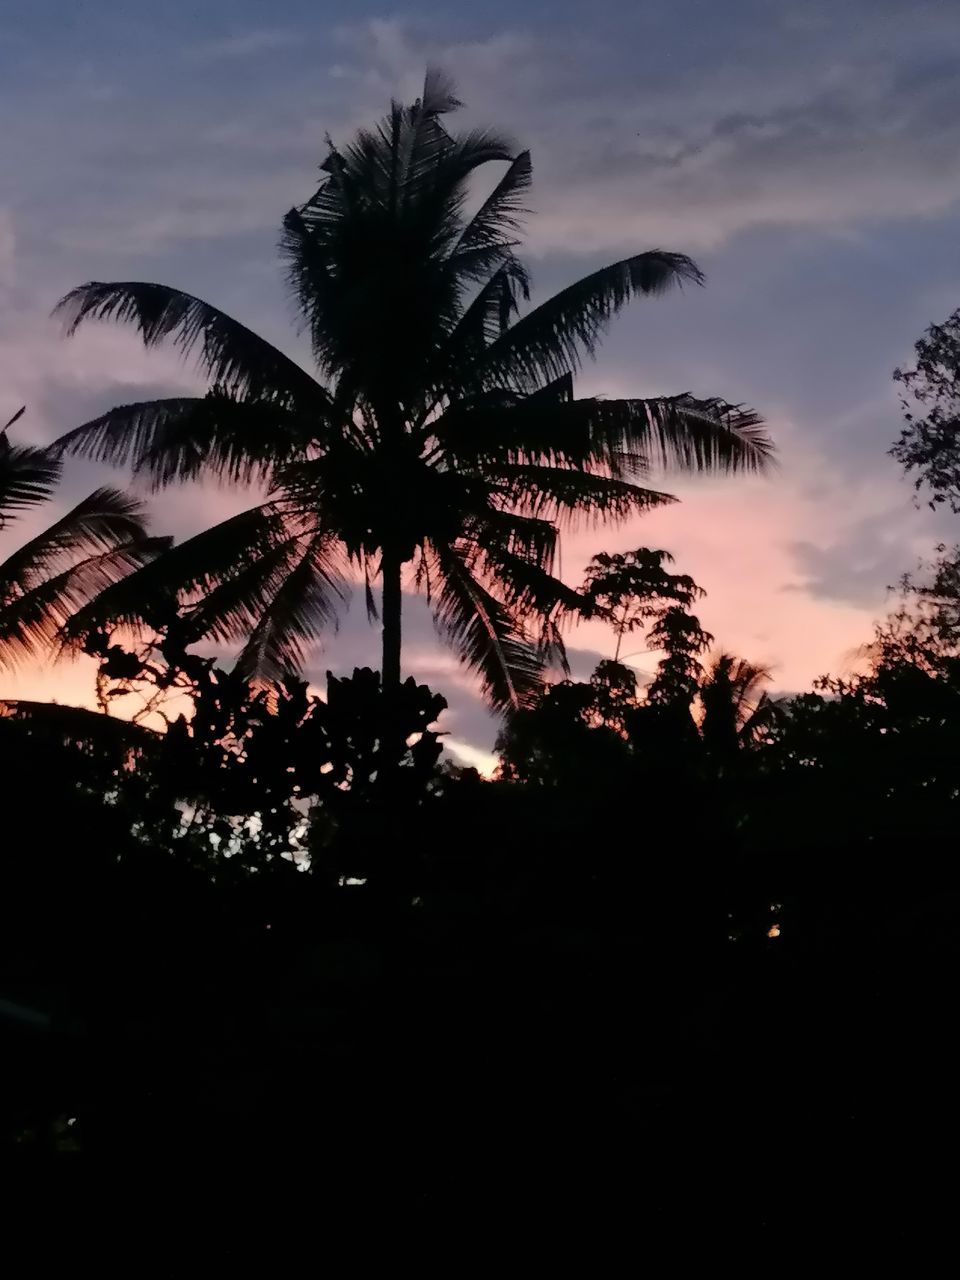 tree, palm tree, sky, tropical climate, plant, silhouette, sunset, nature, beauty in nature, cloud, tranquility, no people, dusk, scenics - nature, coconut palm tree, darkness, land, tropical tree, evening, tranquil scene, outdoors, travel destinations, environment, idyllic, sunlight, holiday, growth, low angle view, vacation, trip, leaf, dramatic sky, tropics, landscape, travel, dark